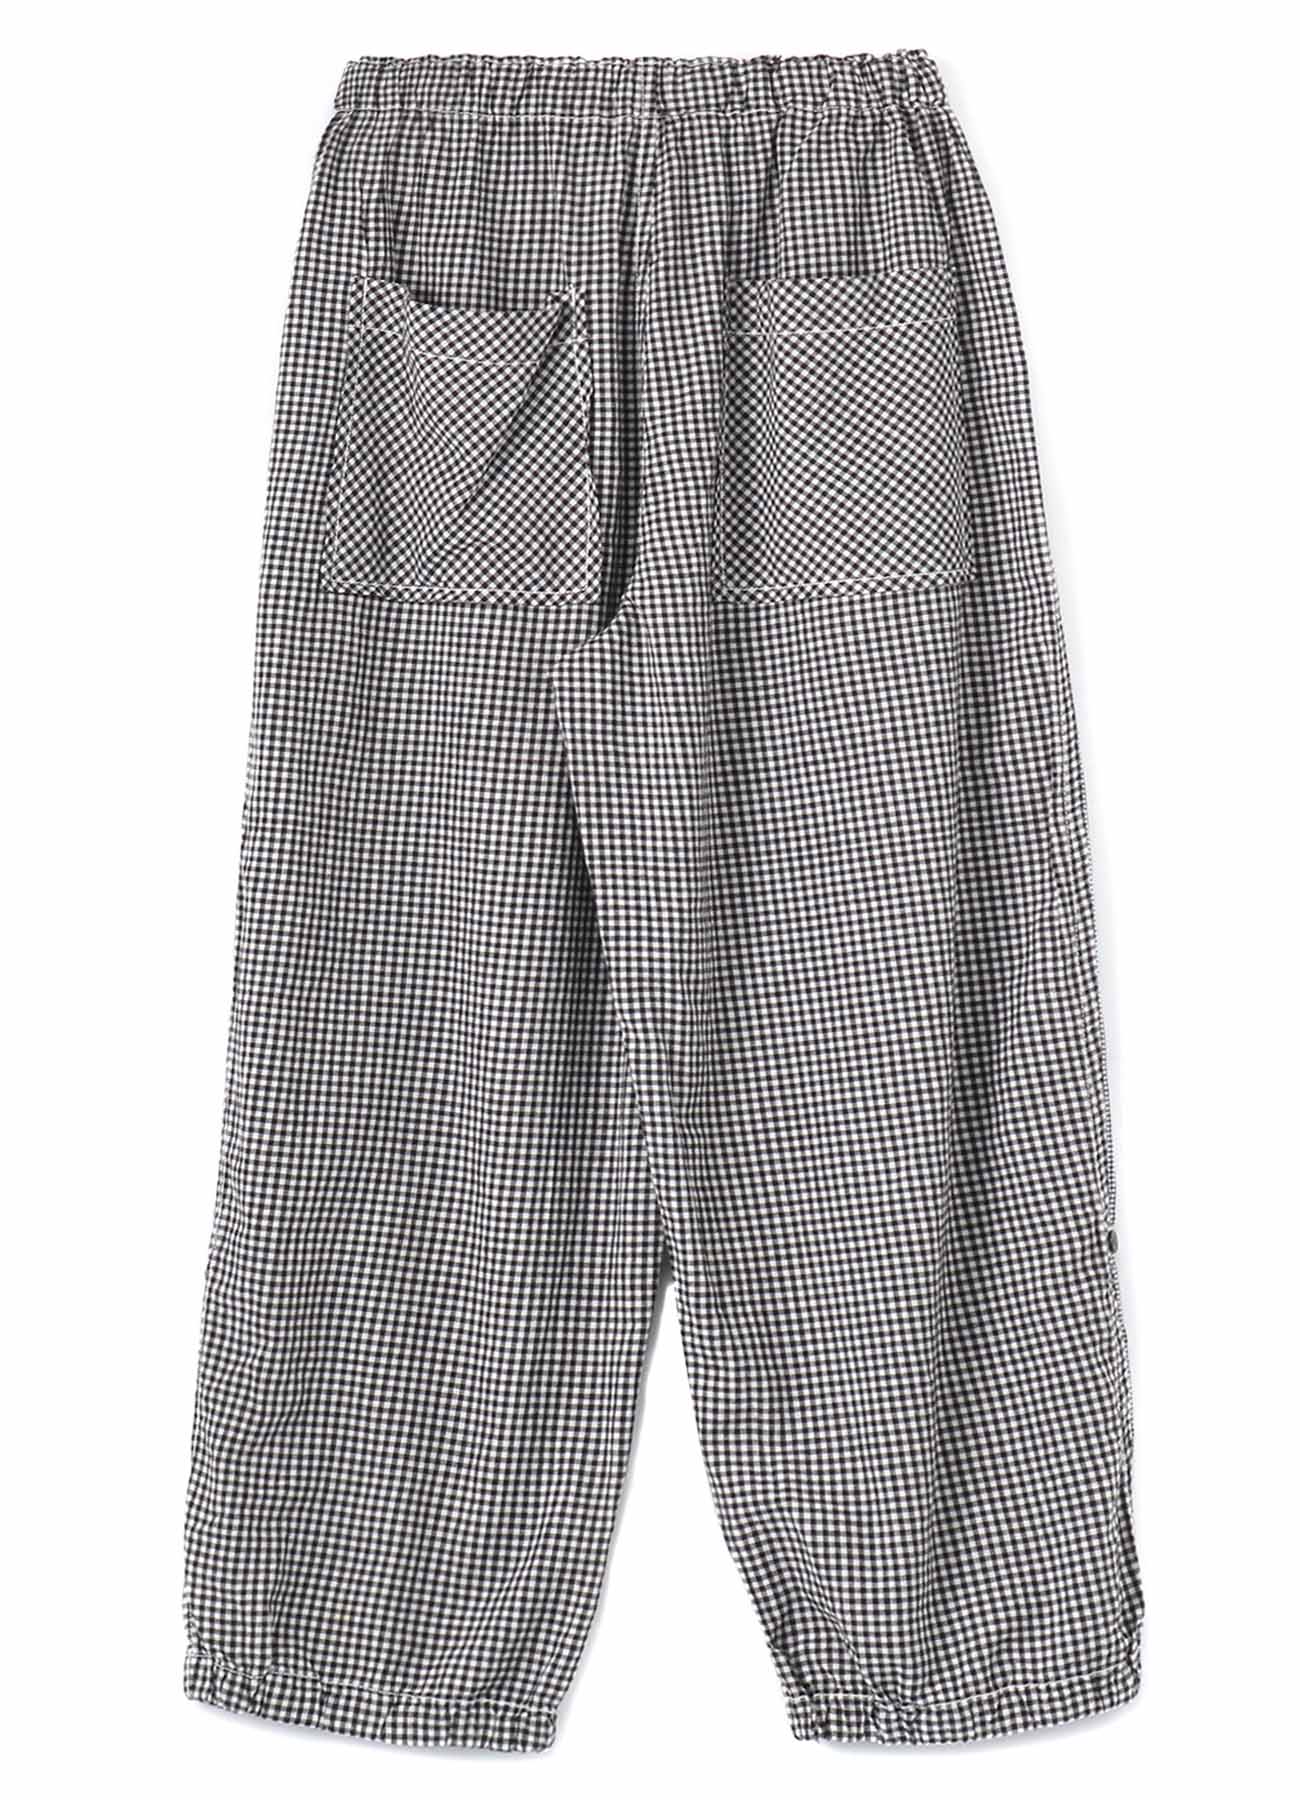 GINGHAM CHECK & COTTON VOILE ROLL UP PANTS